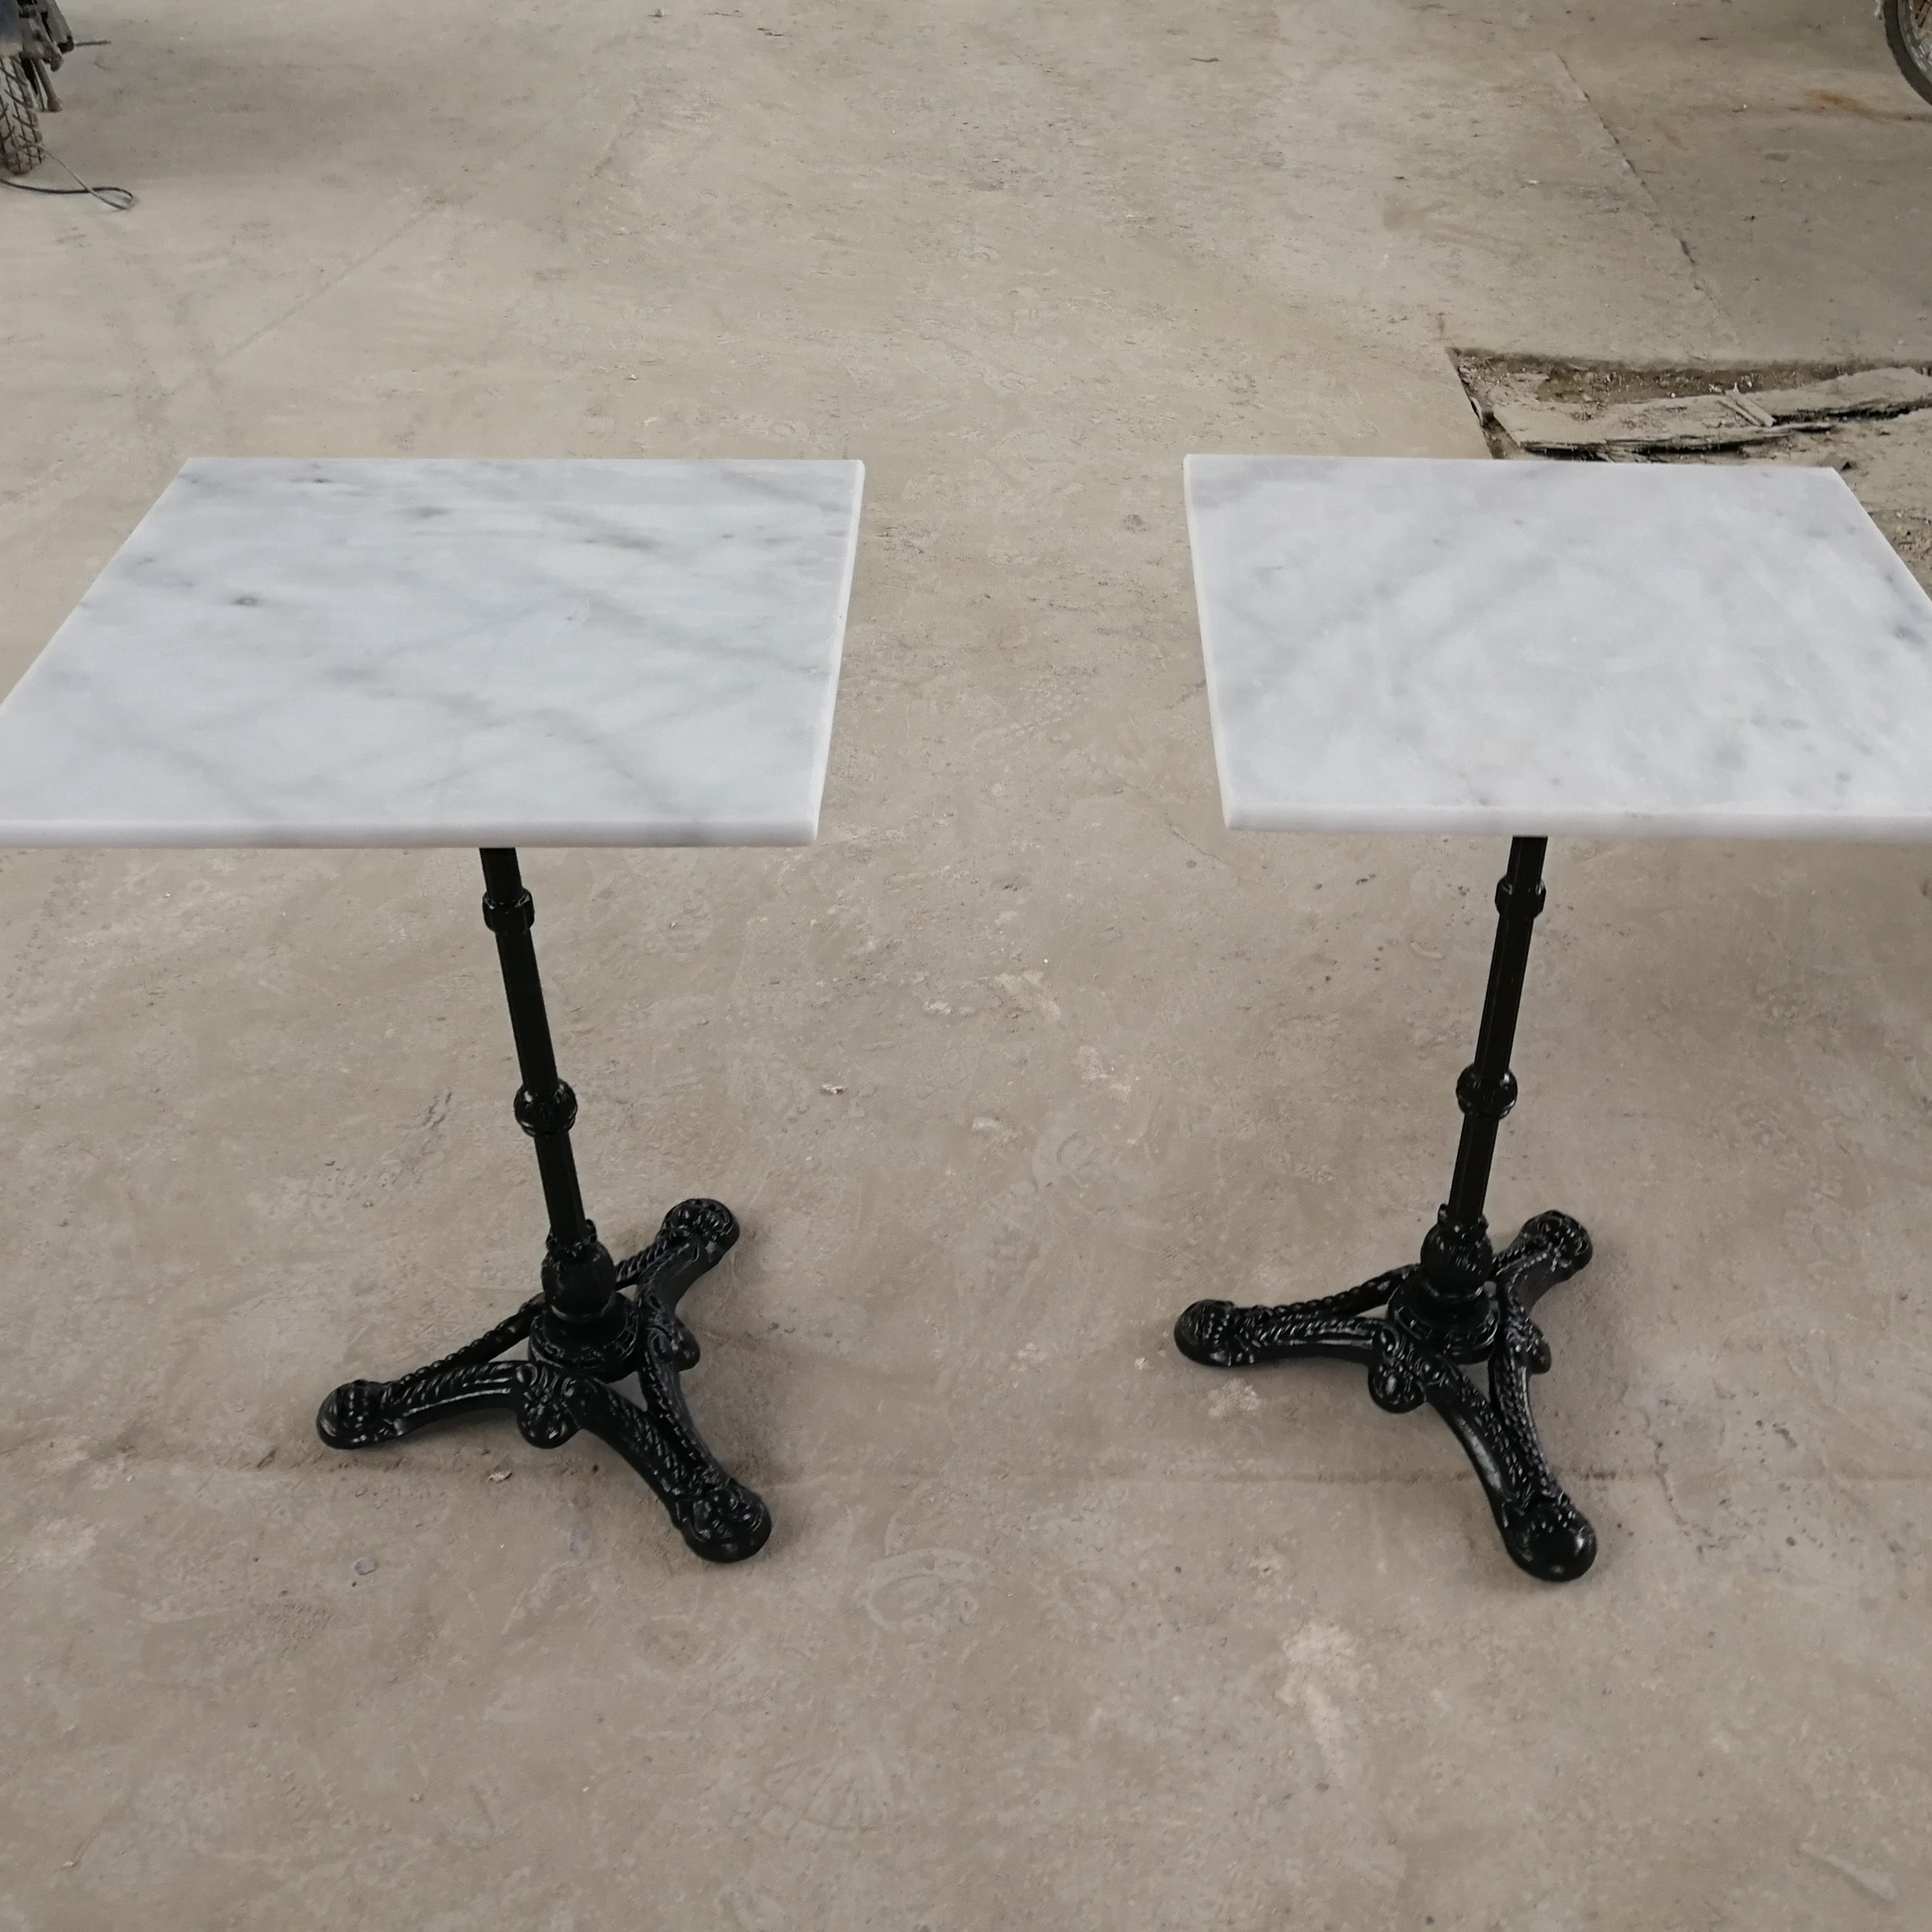 60cm24inch square white marble coffee table